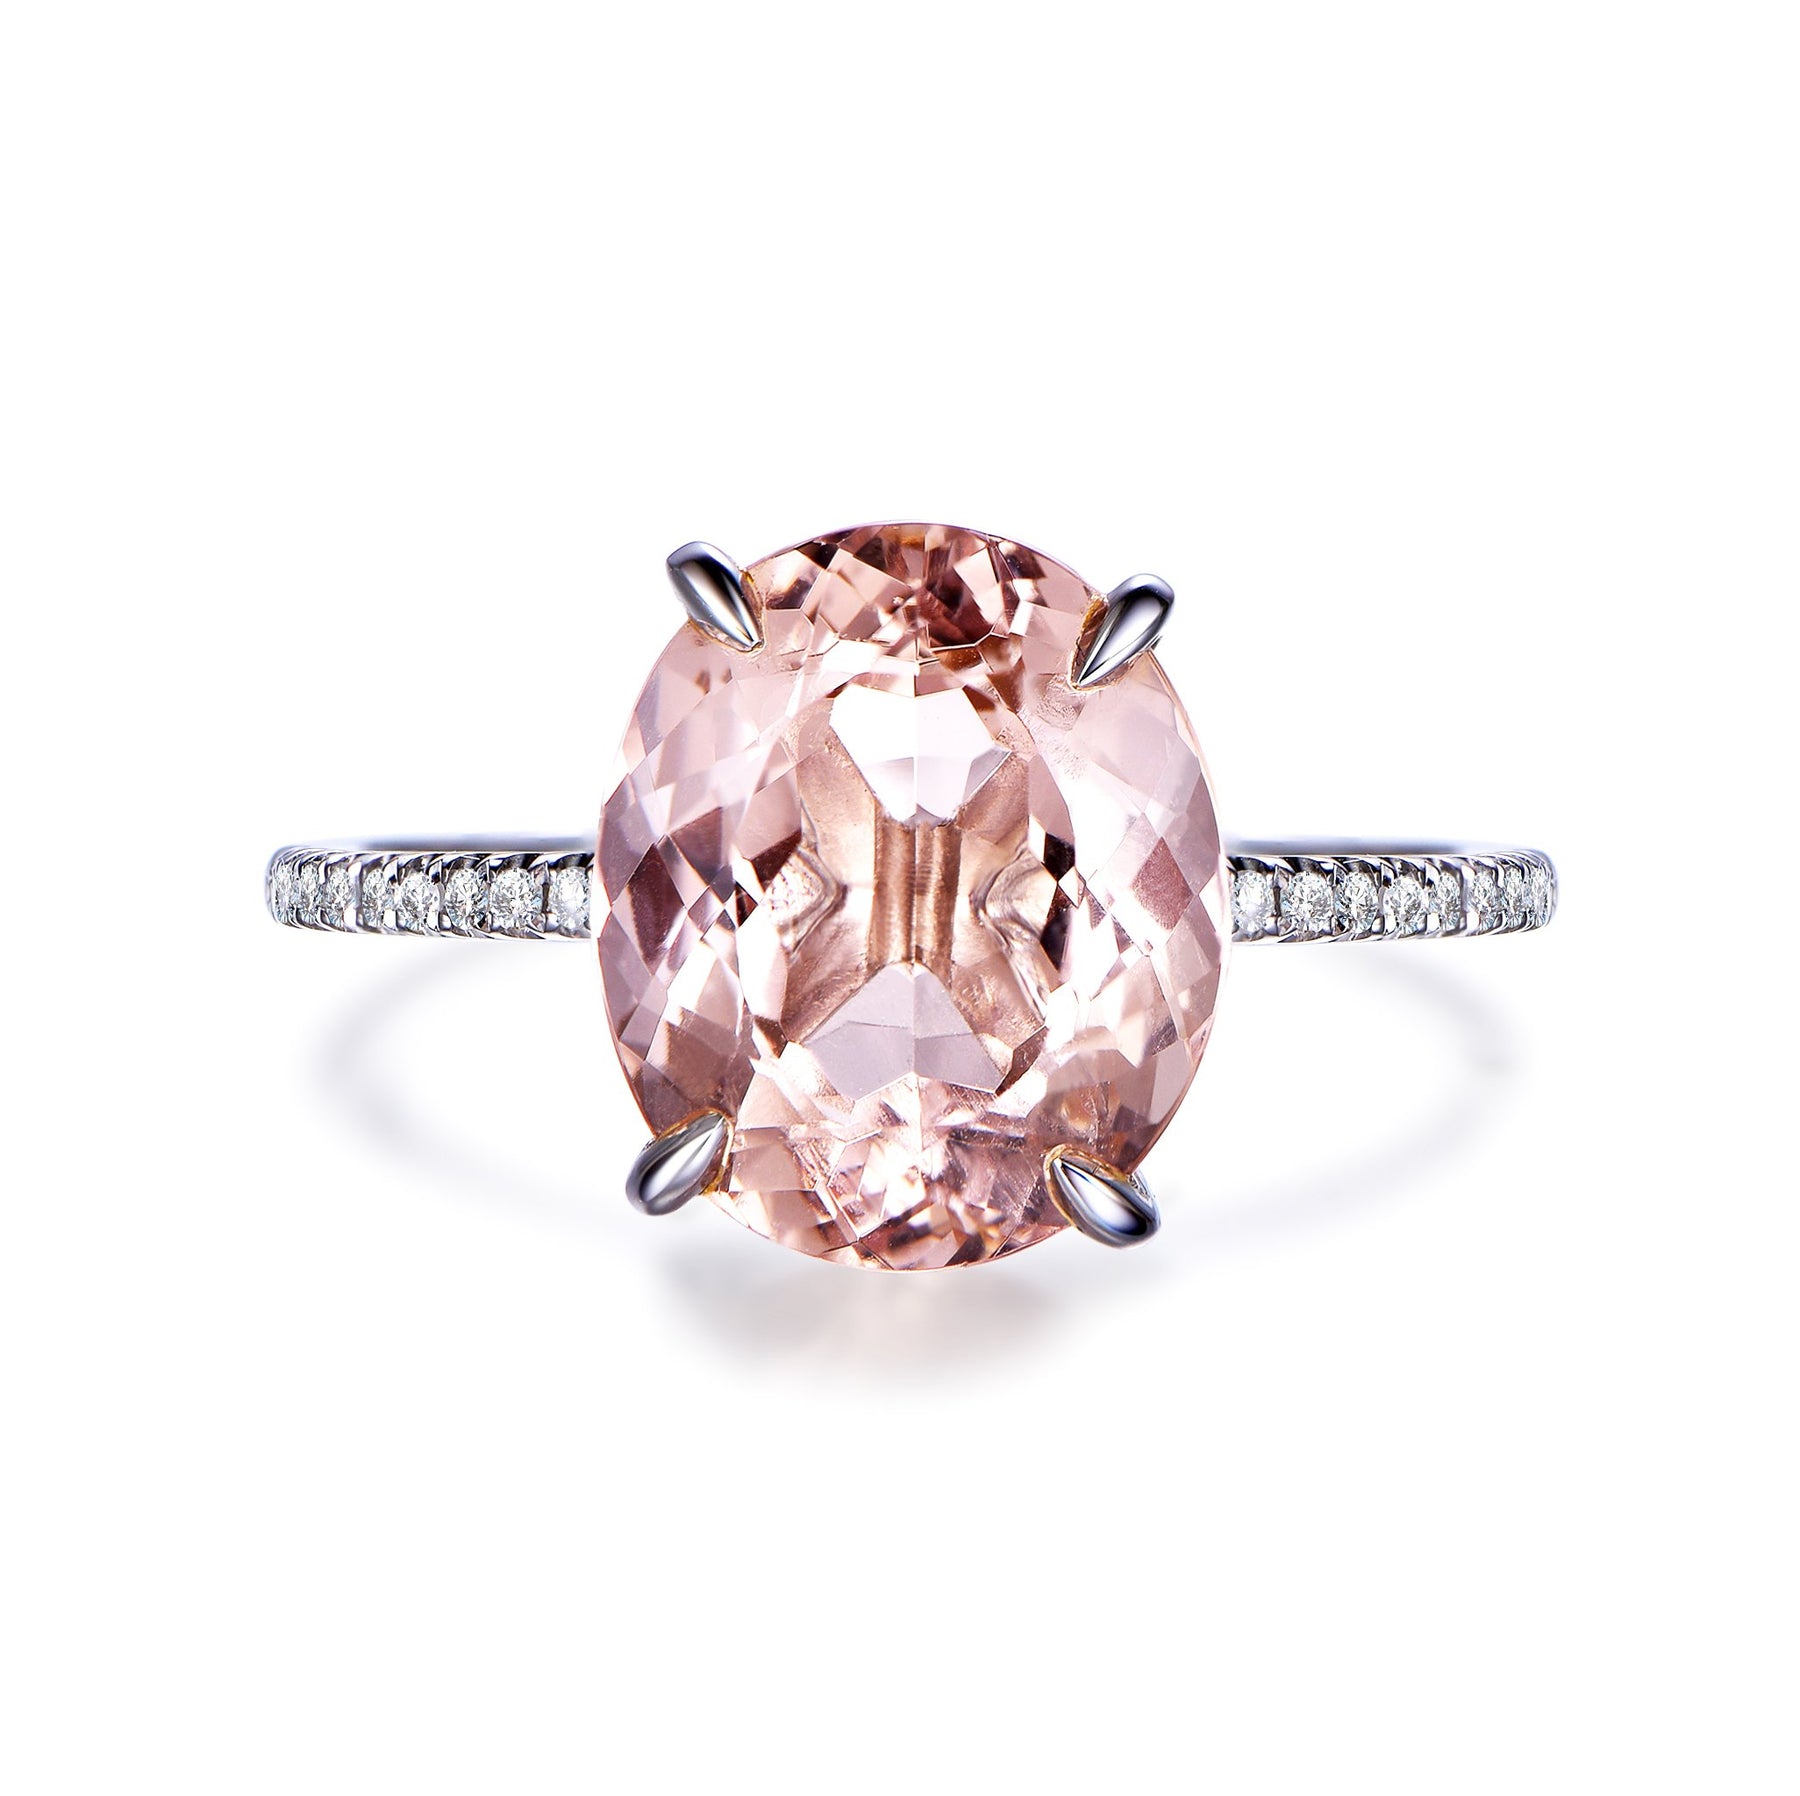 Reserved for GY: Morganite Engagement Ring oval 14K White Gold 9x11mm